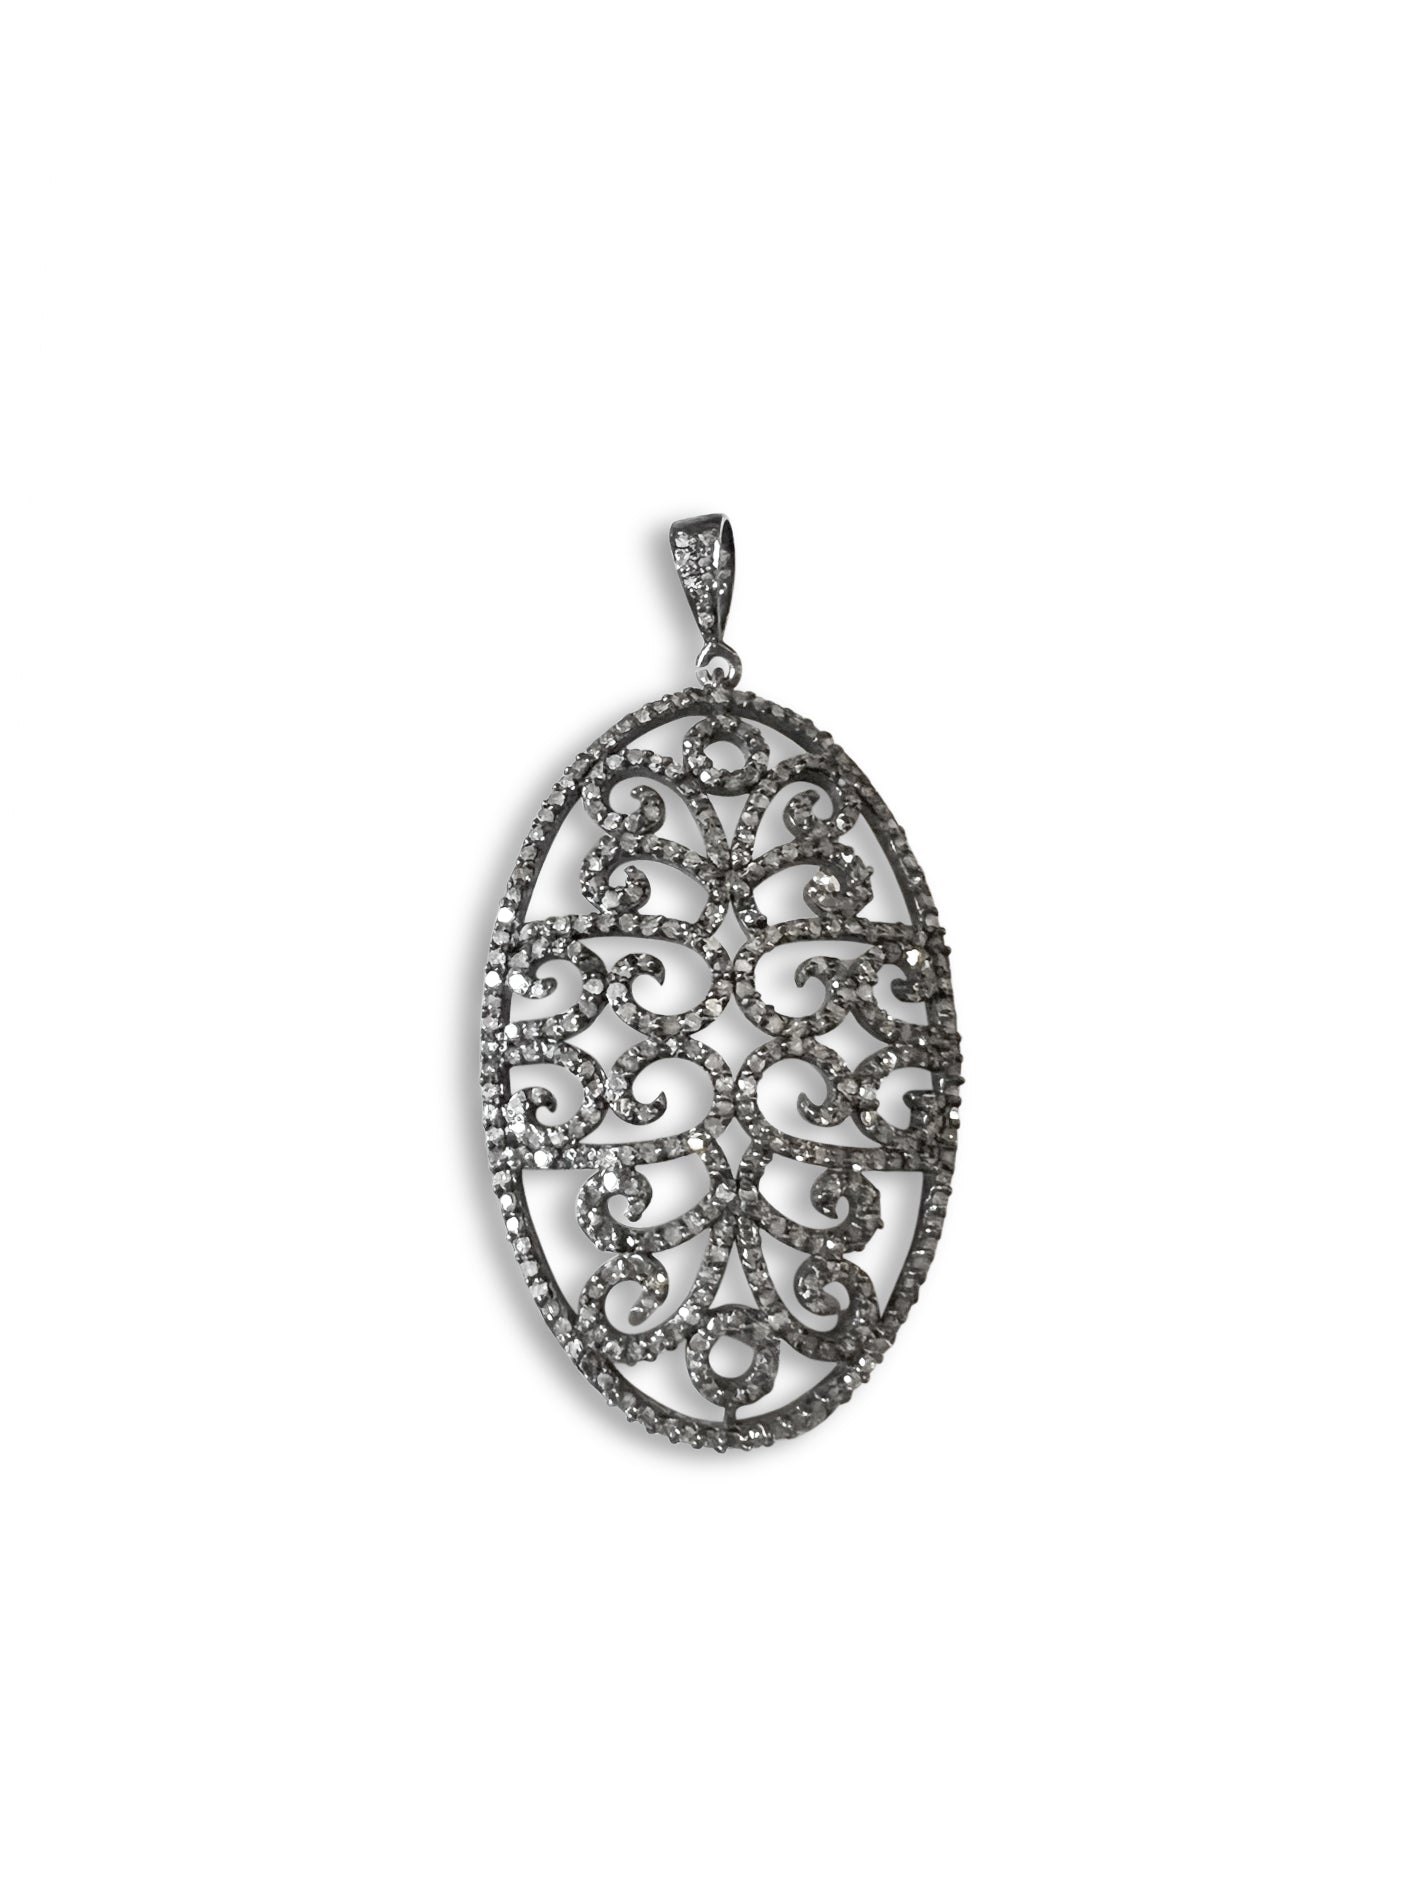 Pave Diamond Oval Pendant set in Sterling Silver